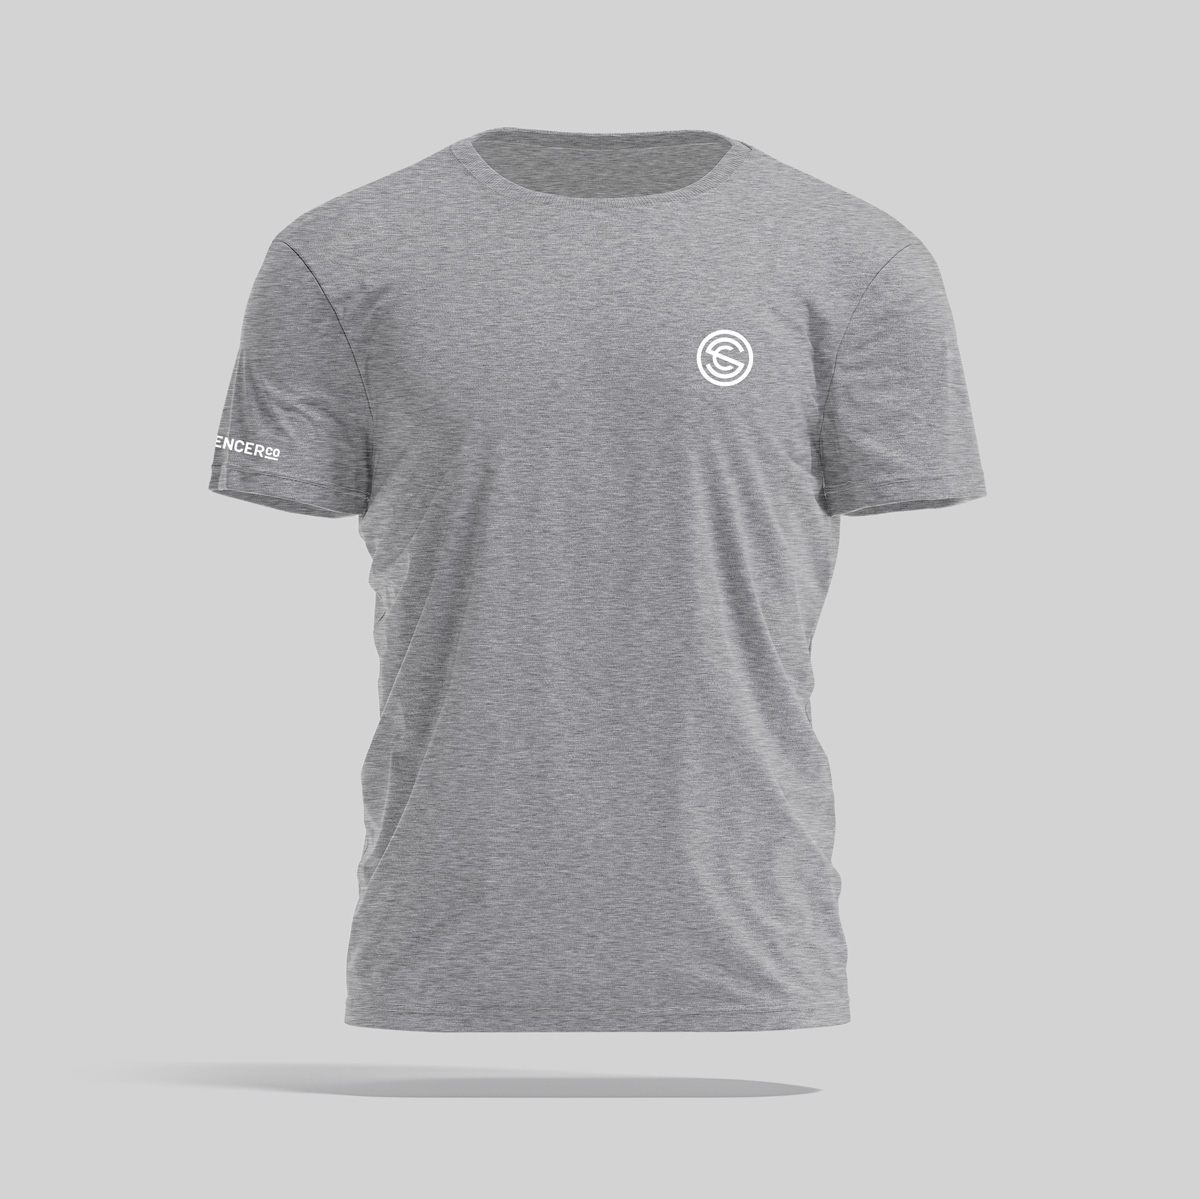 SilencerCo's gray logo tee, clean and timeless.